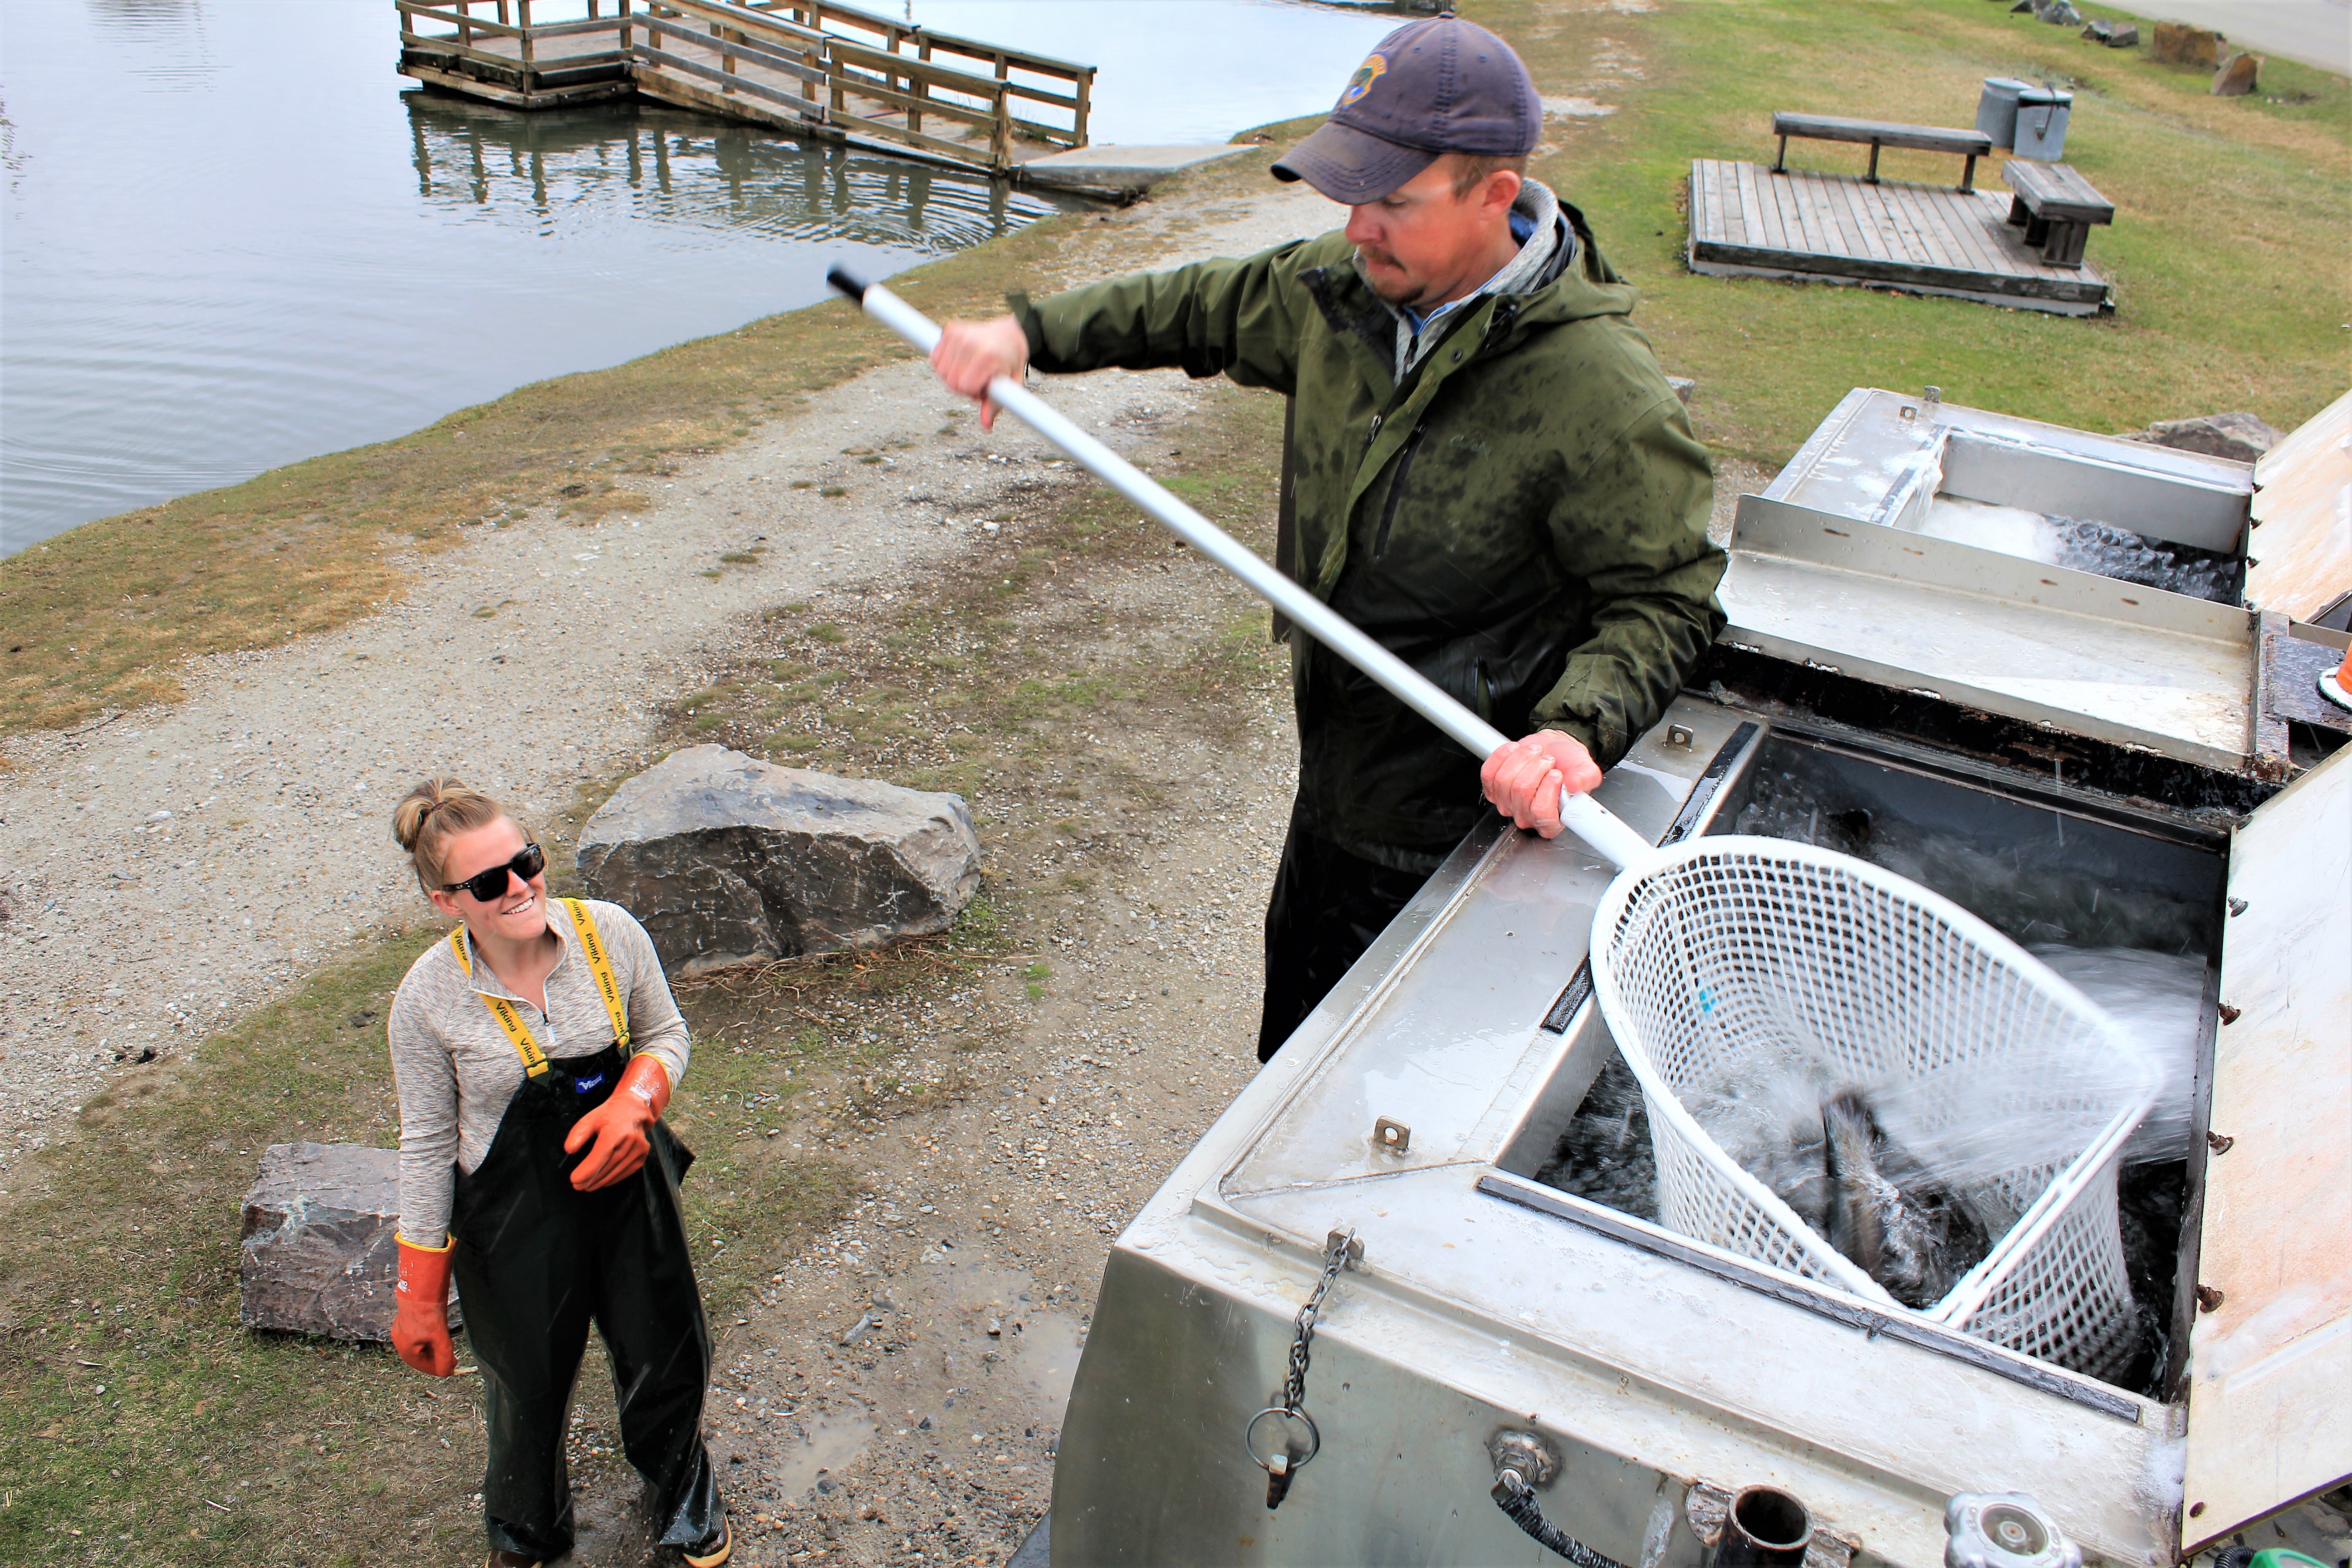 Local fishing ponds to be stocked with lunkers